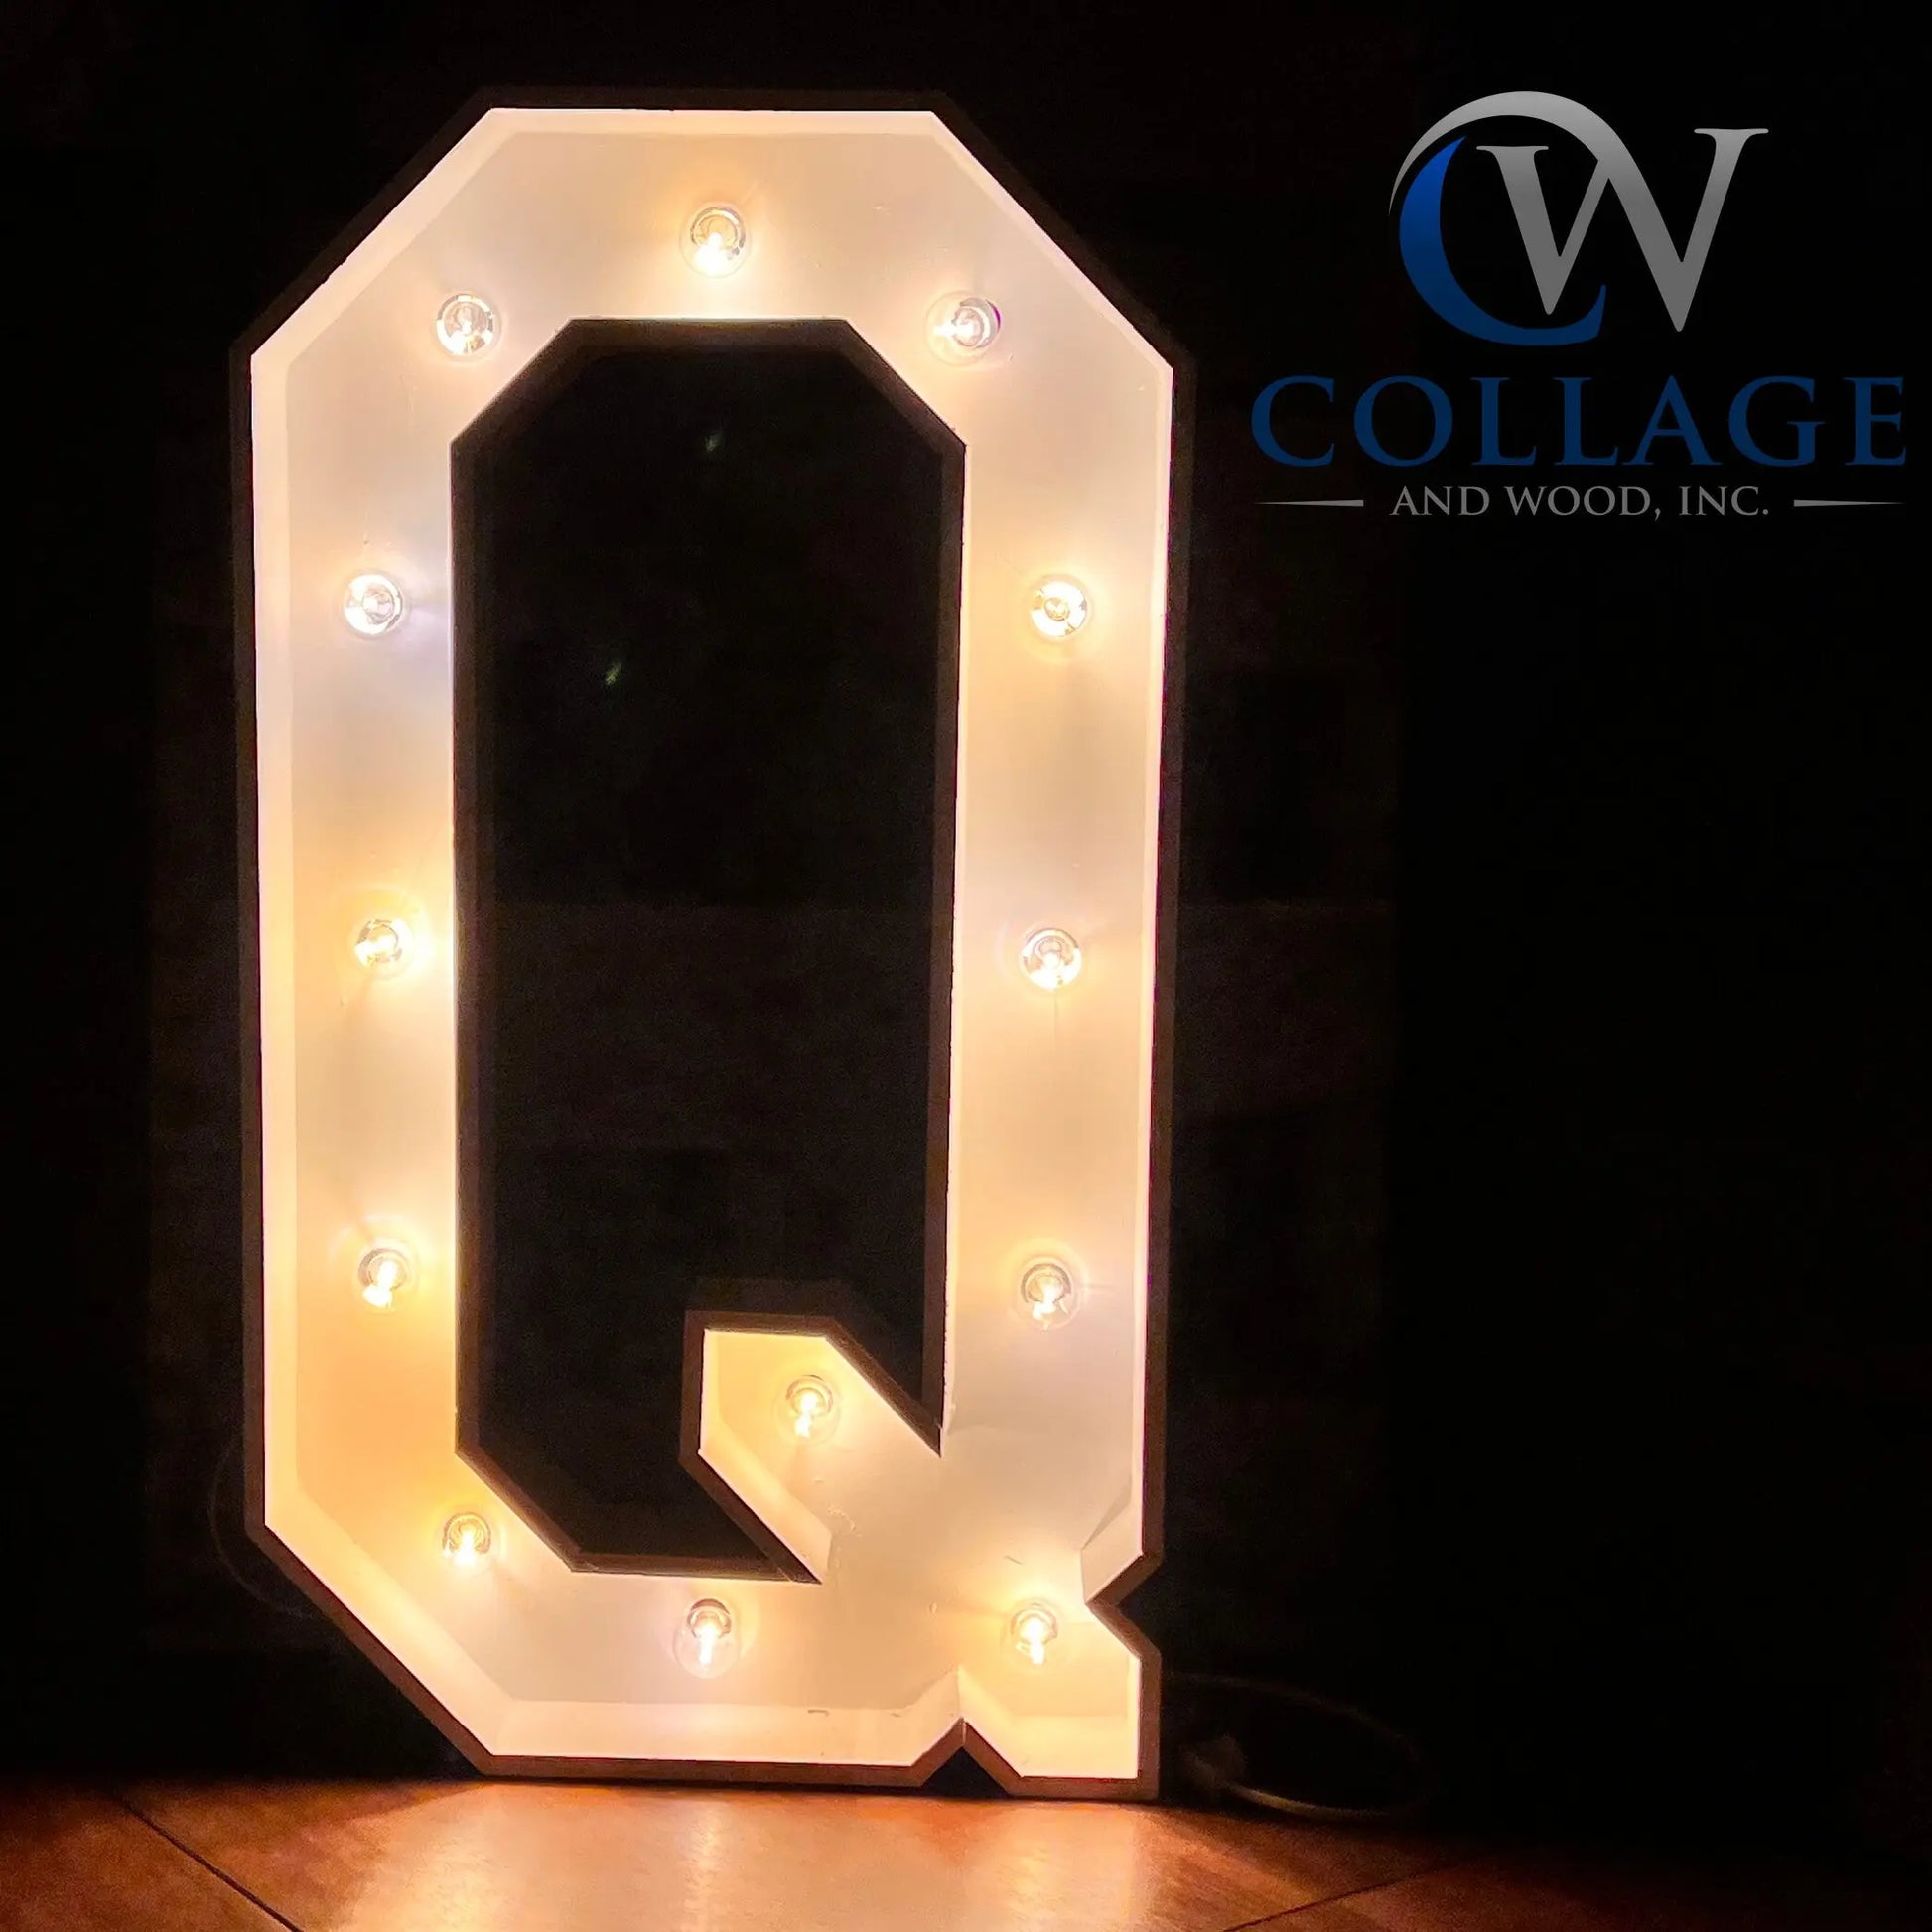 Quintessential 3-foot tall wooden marquee letter Q, classically painted in white, adorned with gleaming battery-powered LED lights